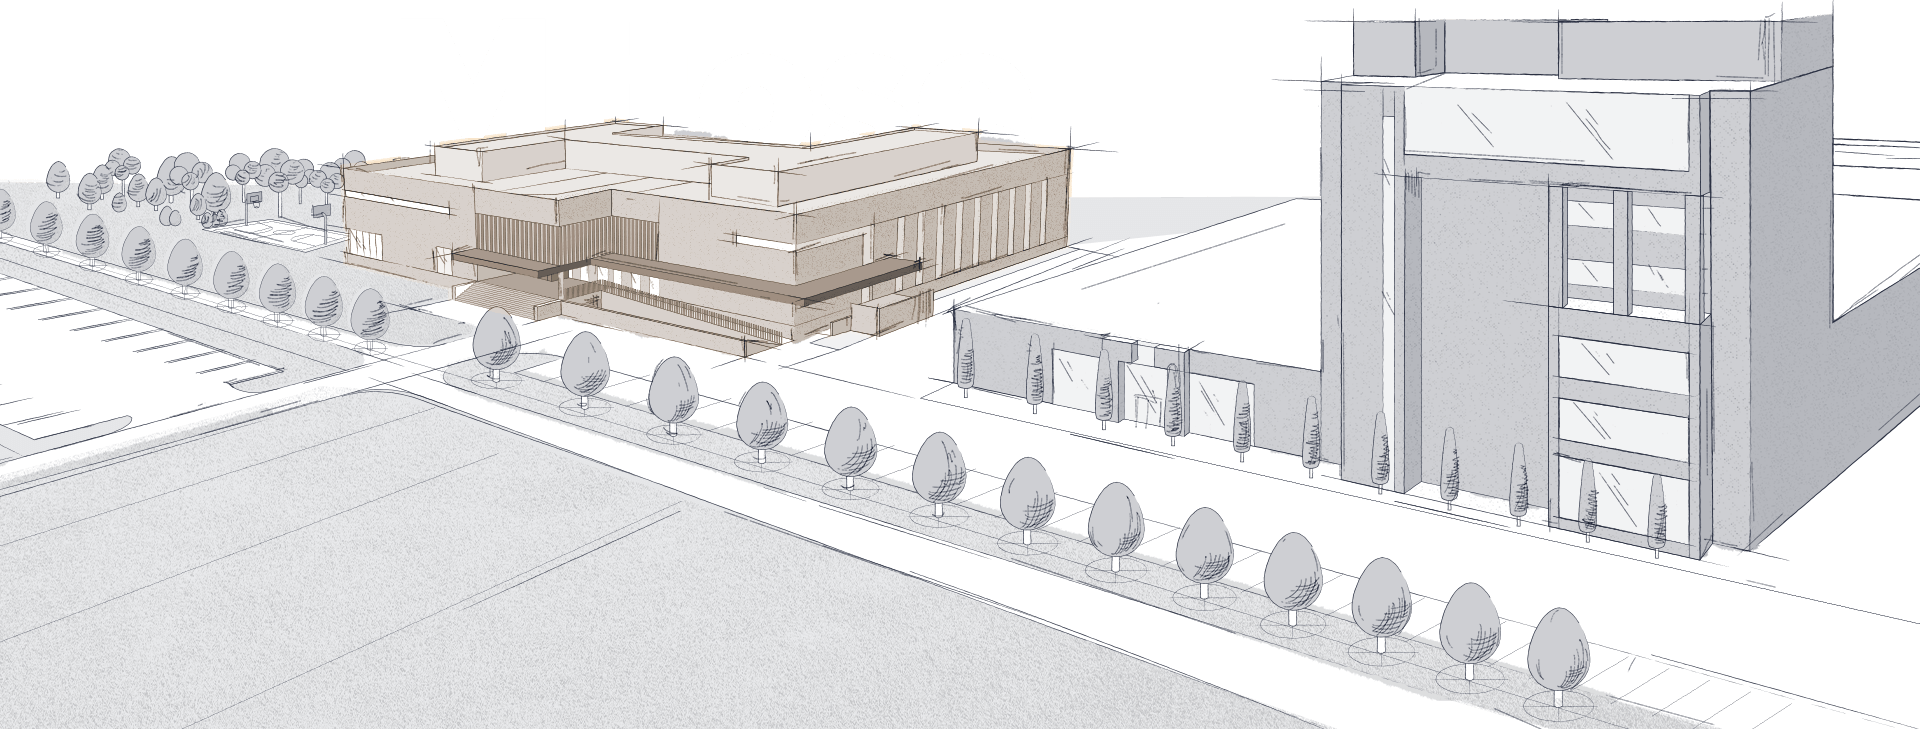 MITOSE project